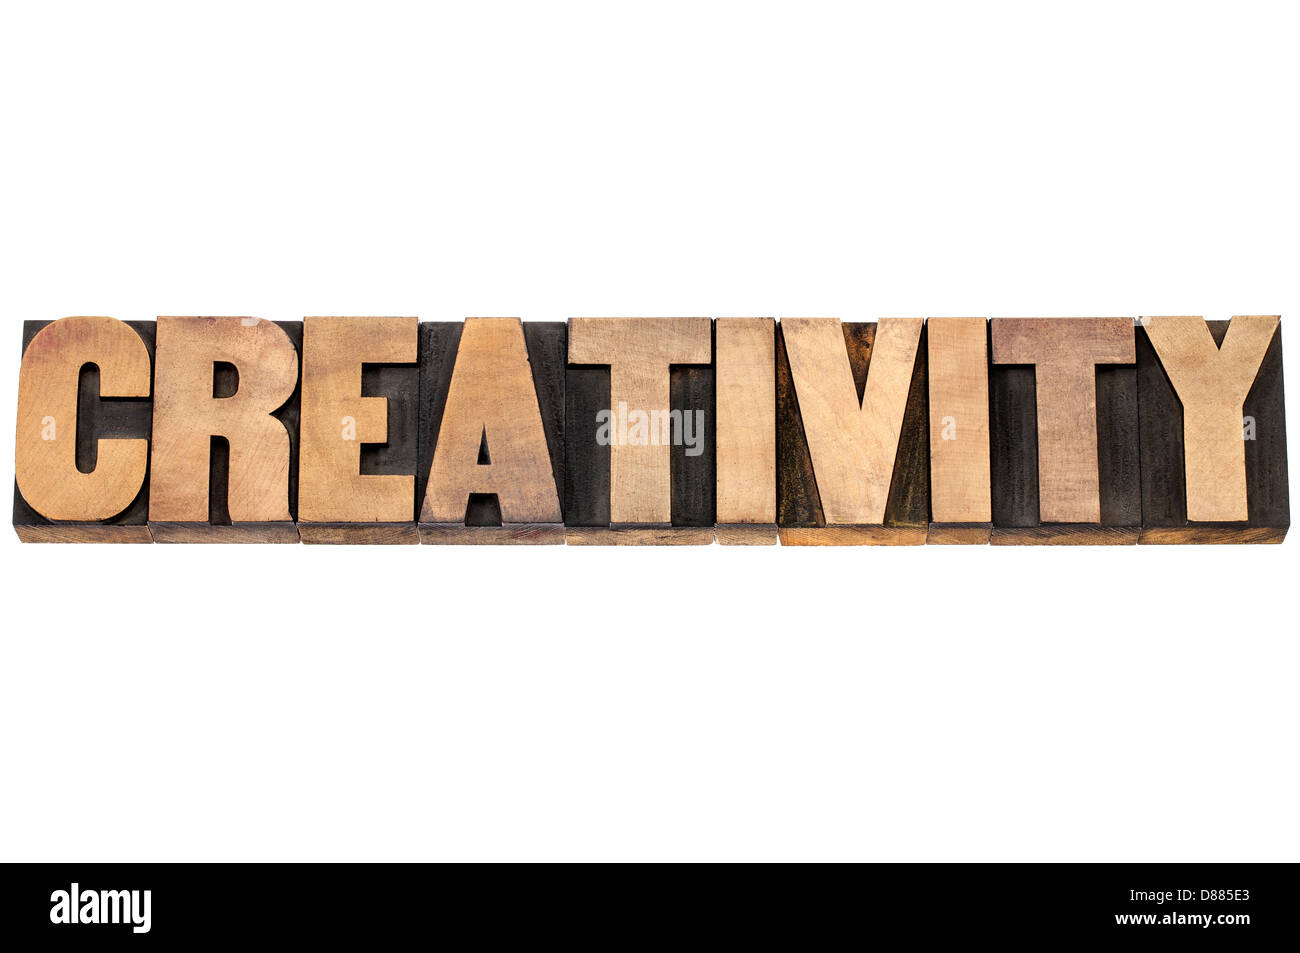 creativity word - isolated text in letterpress wood type printing blocks Stock Photo